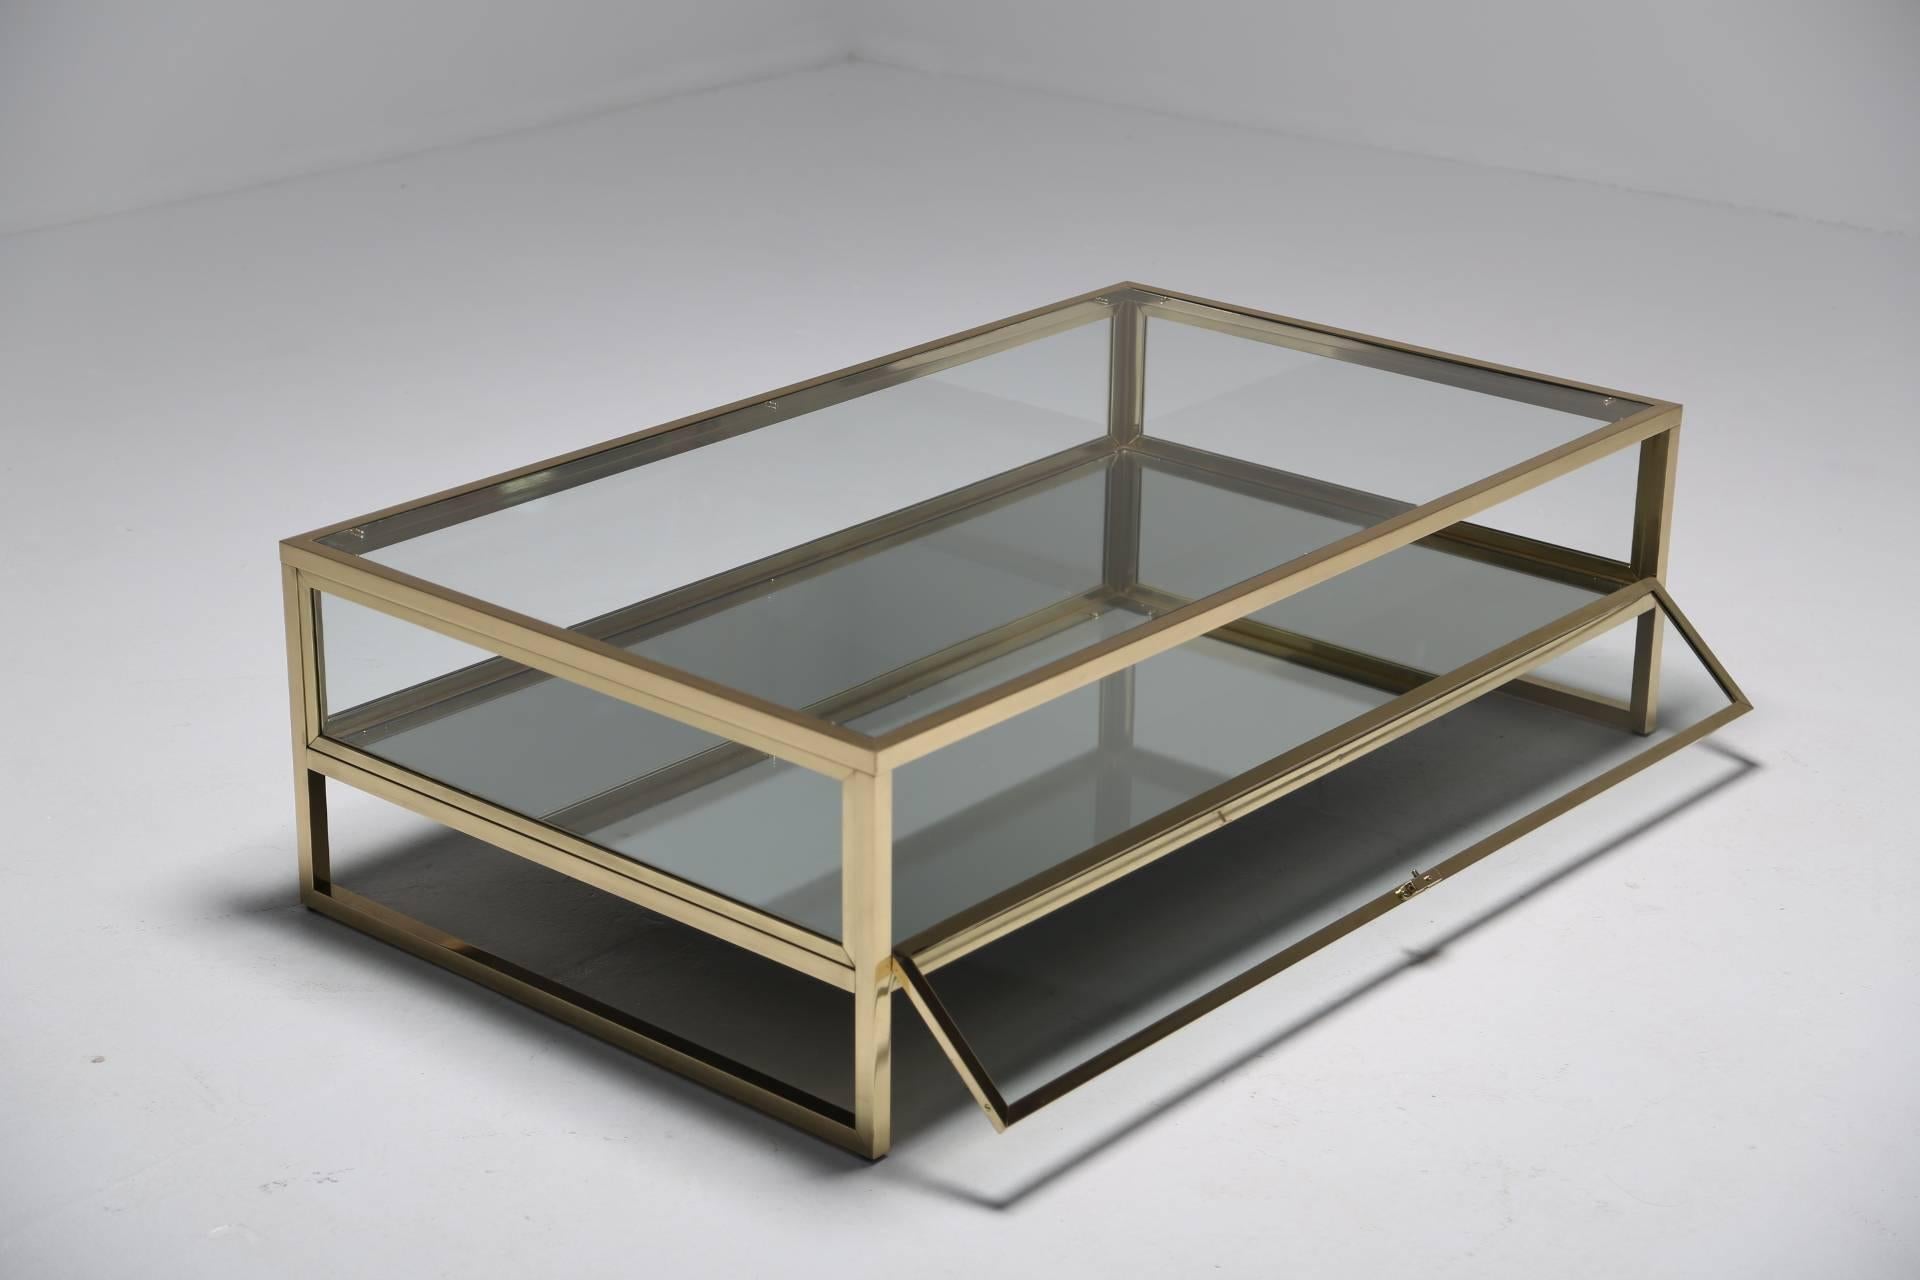 This French brass and glass curio display table really is the chicest way to display your beautiful collectibles. In immaculate condition, this stunning rectangular coffee table, dating back to the 1970s, has an elegant brass frame surrounded by